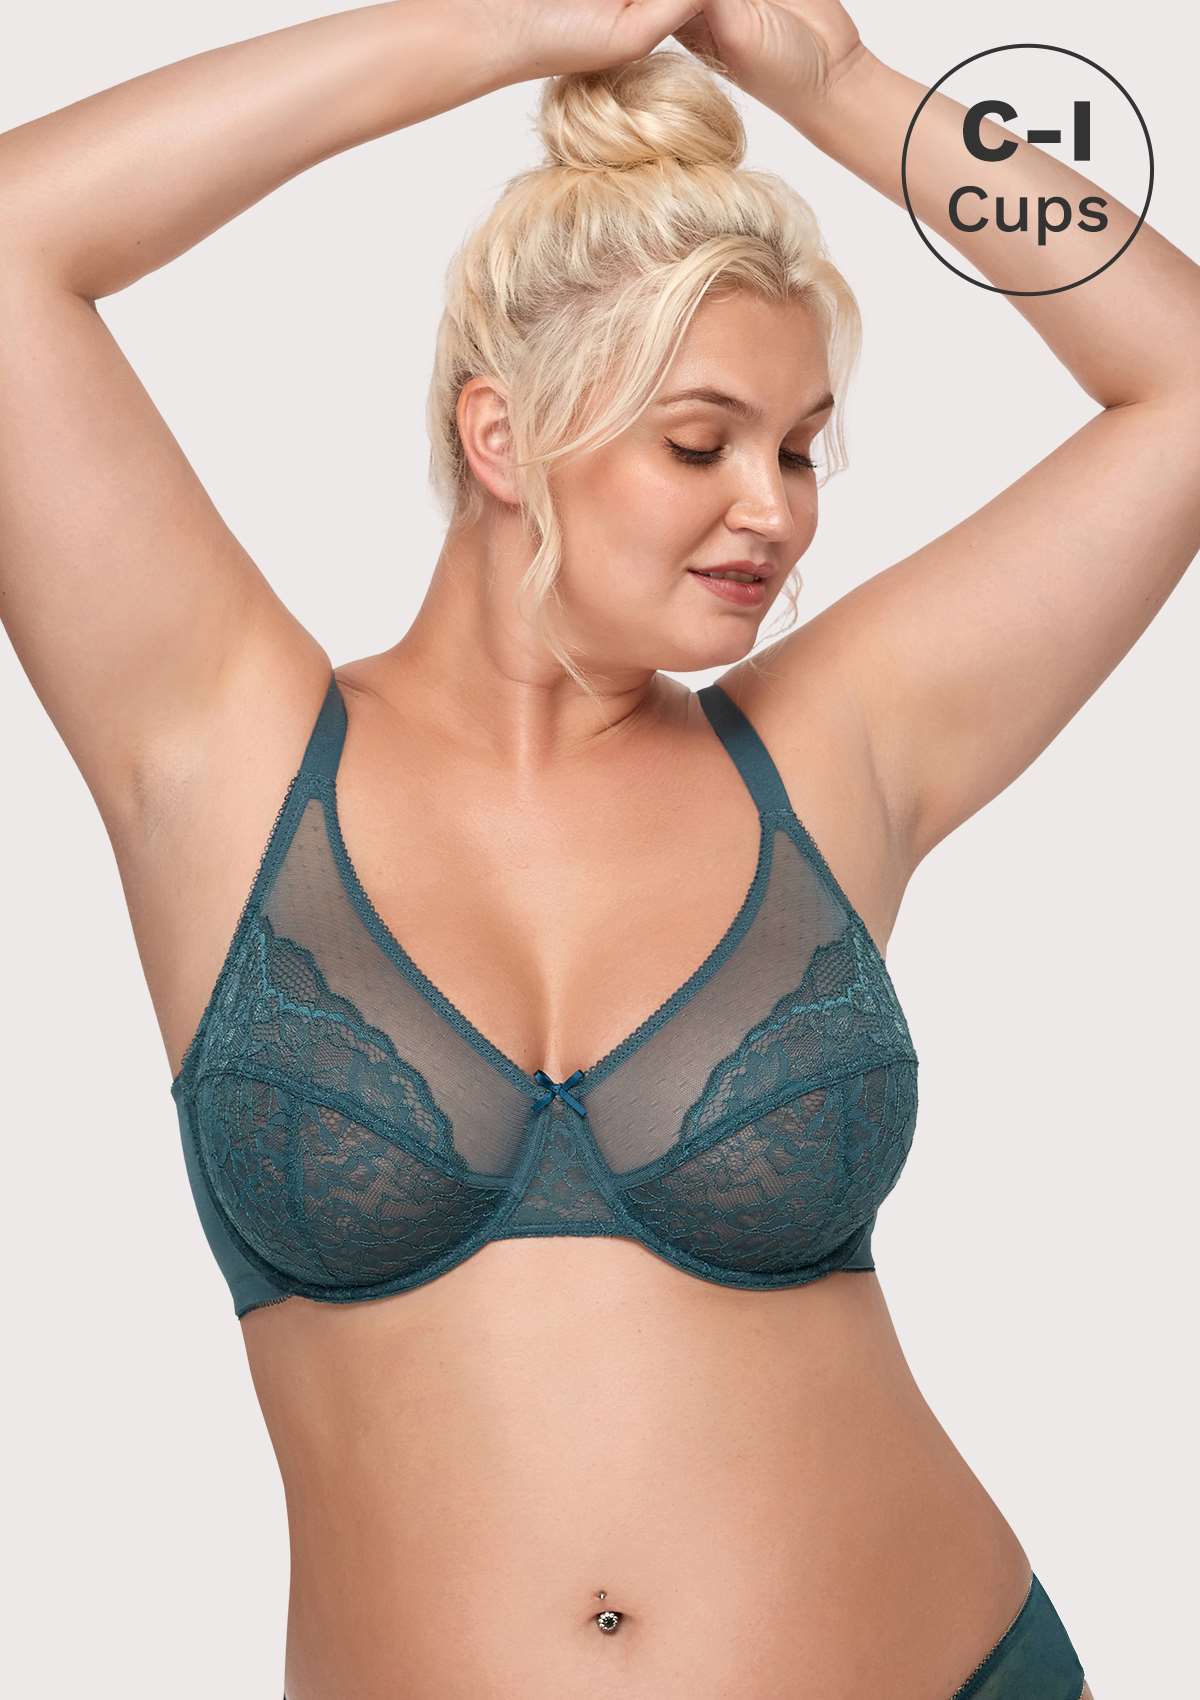 HSIA Enchante Full Coverage Bra: Supportive Bra For Big Busts - Balsam Blue / 42 / D